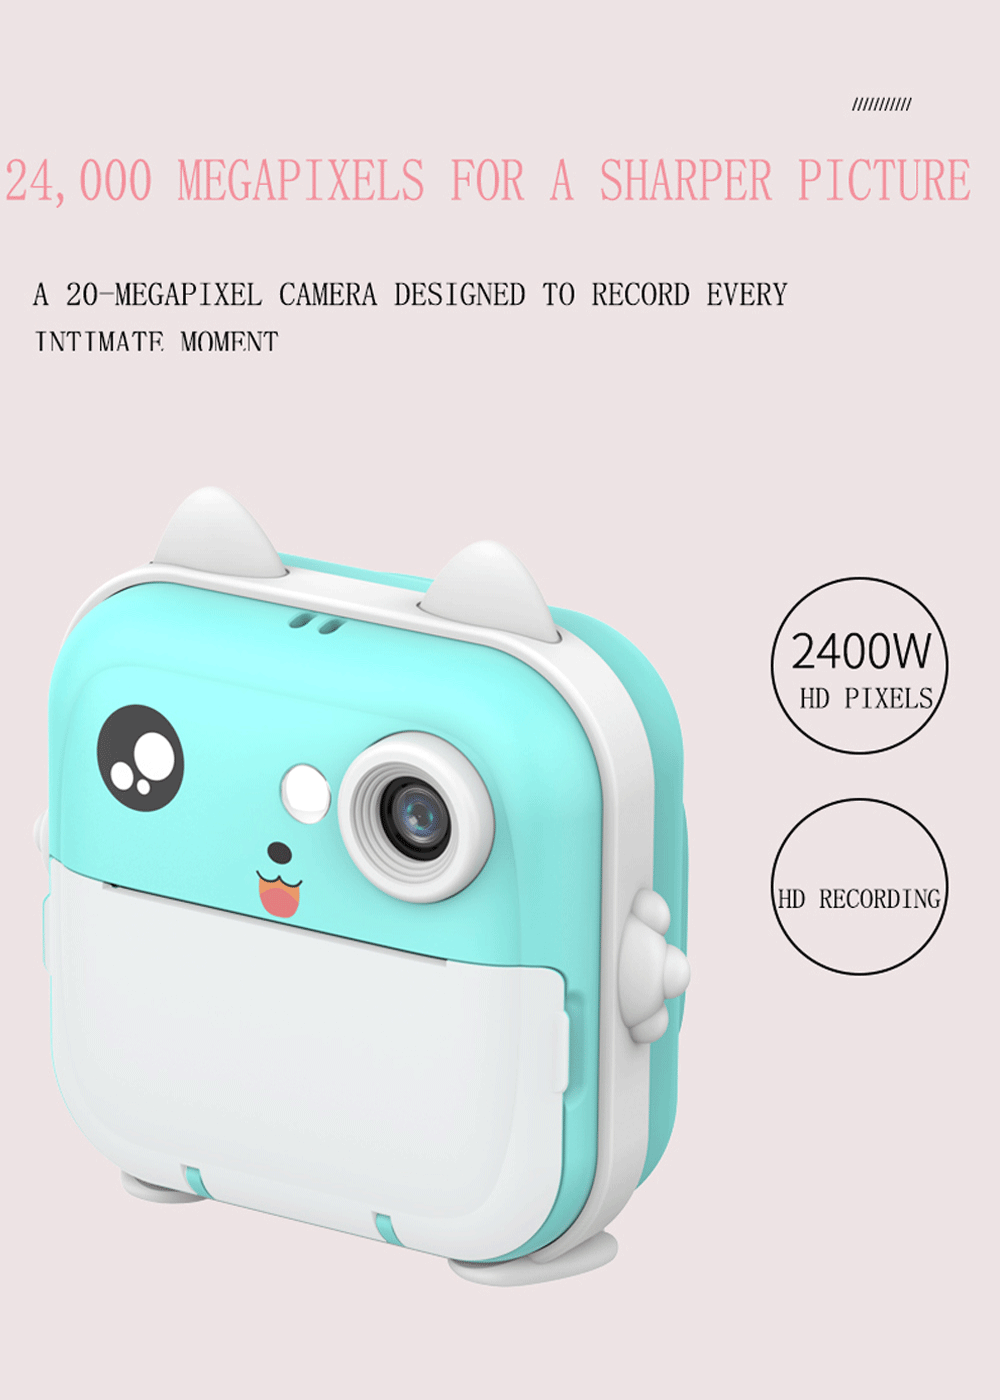 S8c4c33b2157b4c139de1f79daa3aea45L Digital Children Camera For Photography Instant Print Photo Kids